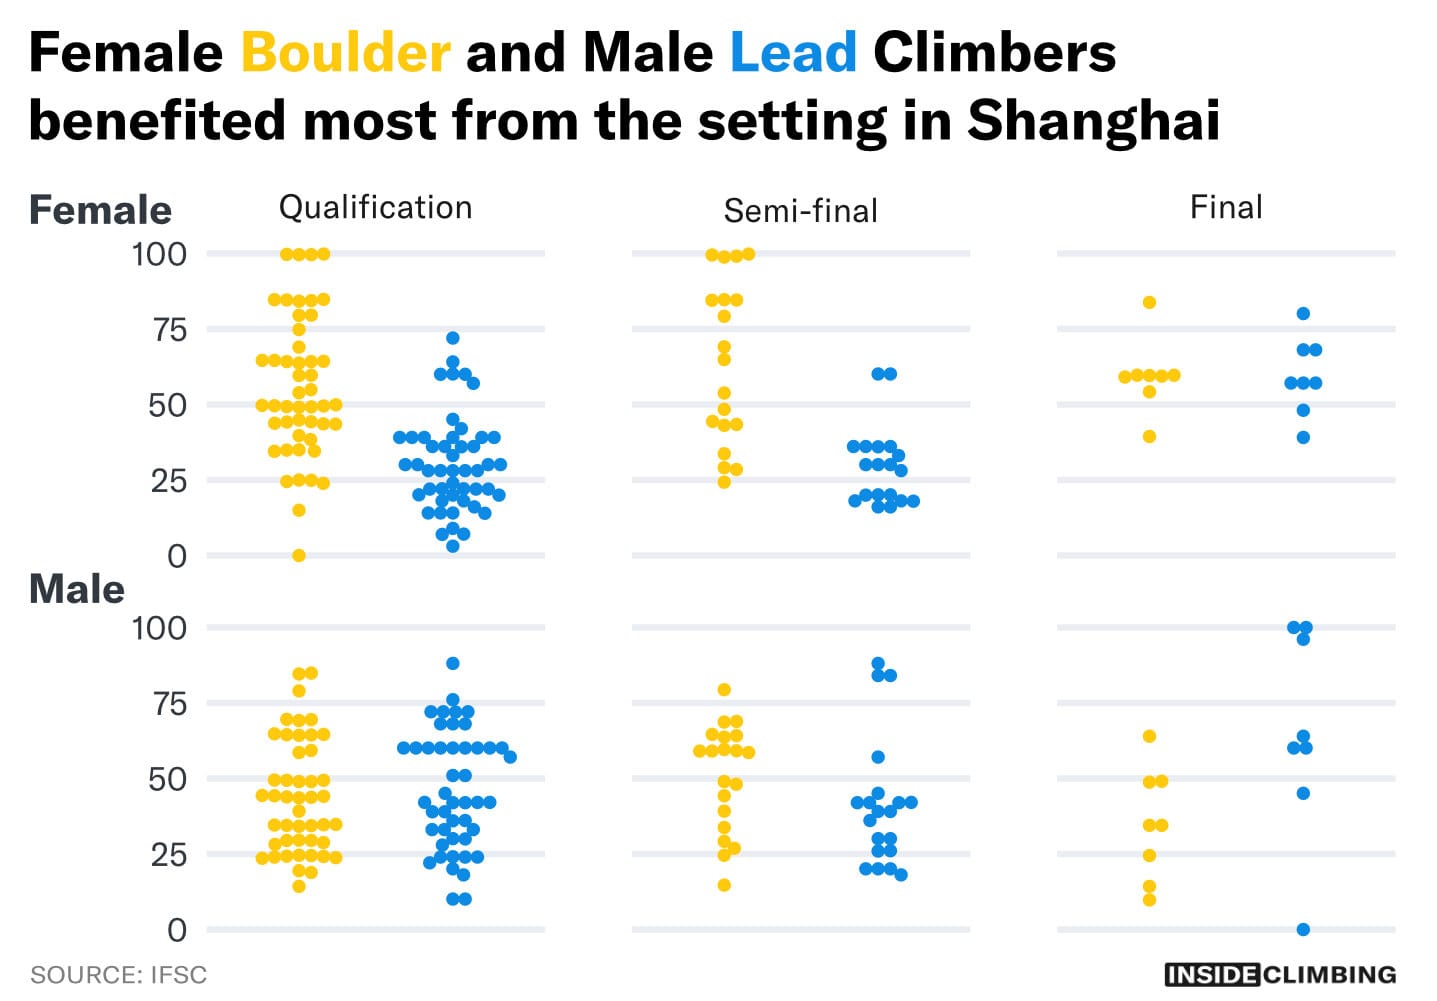 Who Benefitted from the Routesetting at the Shanghai OQS in Boulder&Lead?